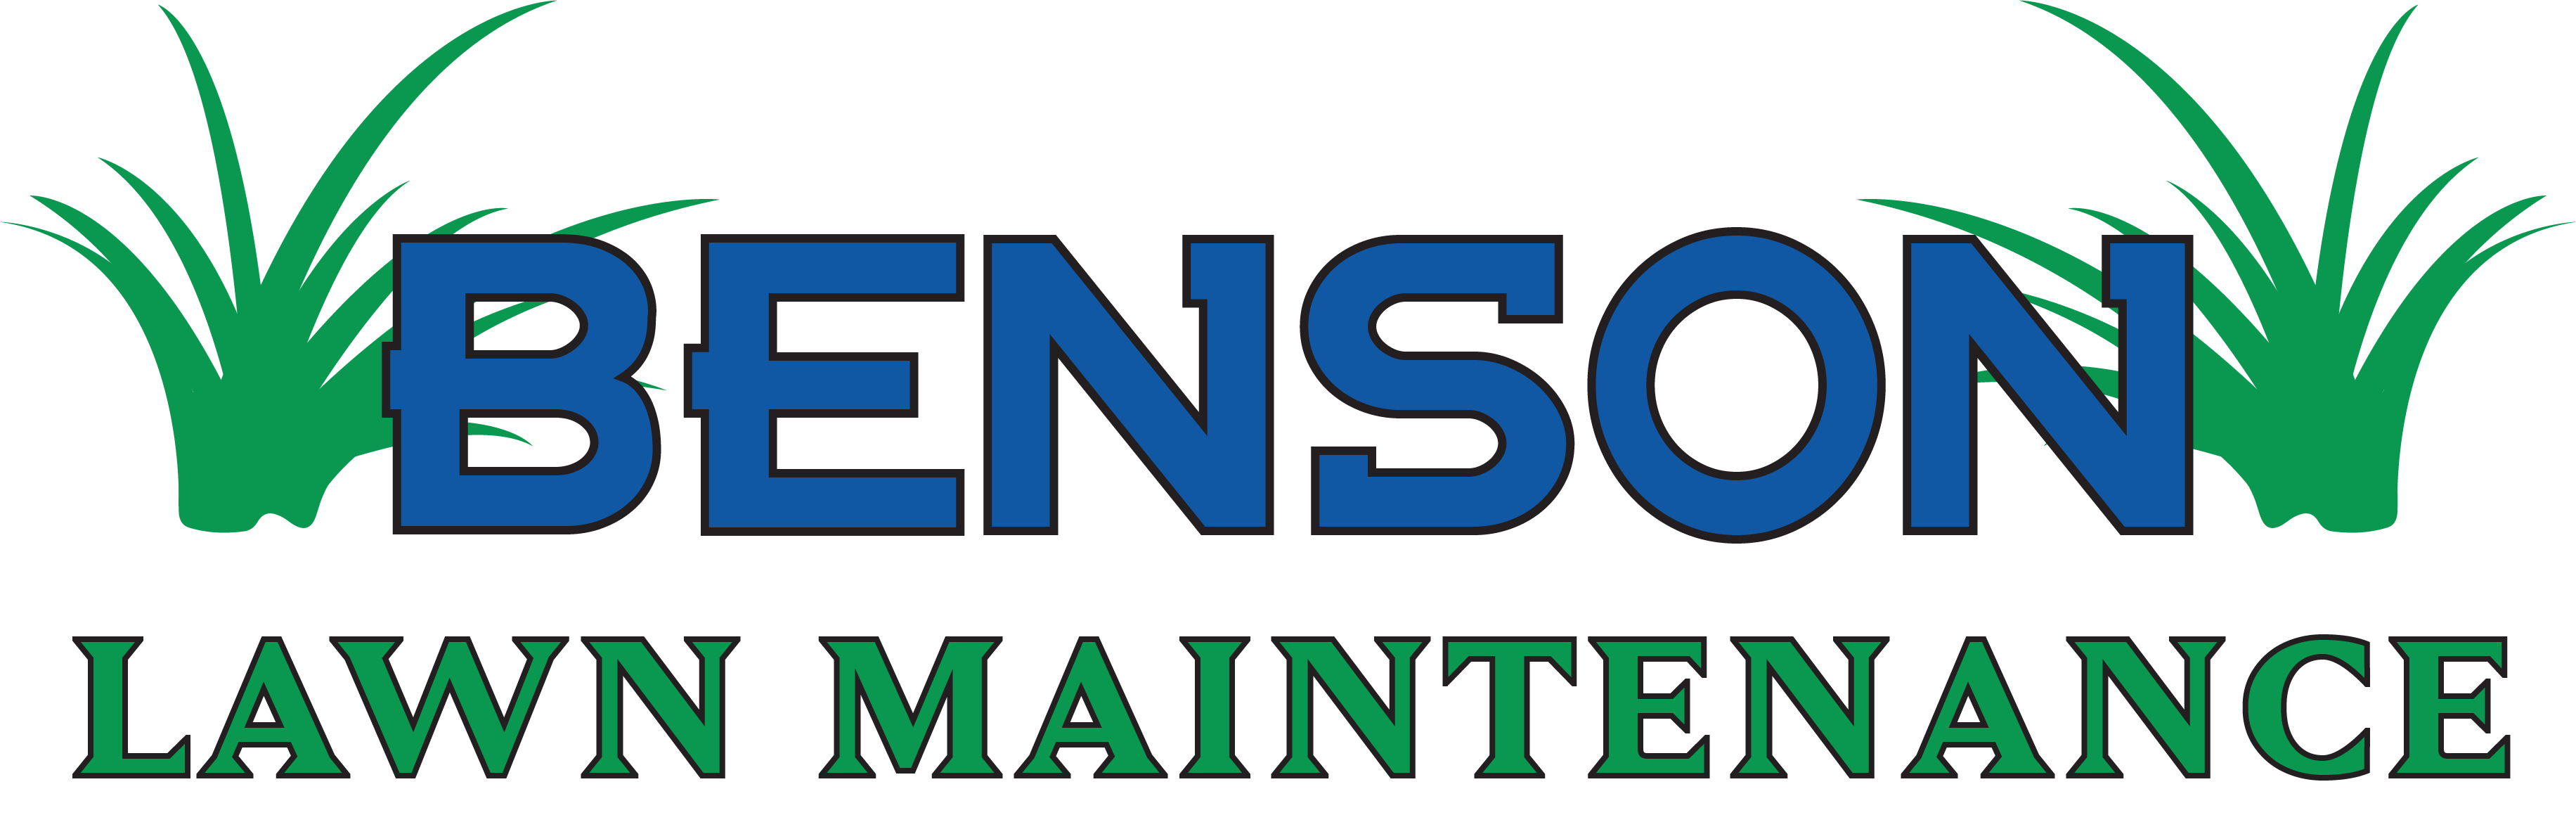 Benson Lawn Maintenance which operates in Augusta ga, North augusta sc, Aiken sc, and Grovetown ga logo with the full name spelled out surrounded by grass